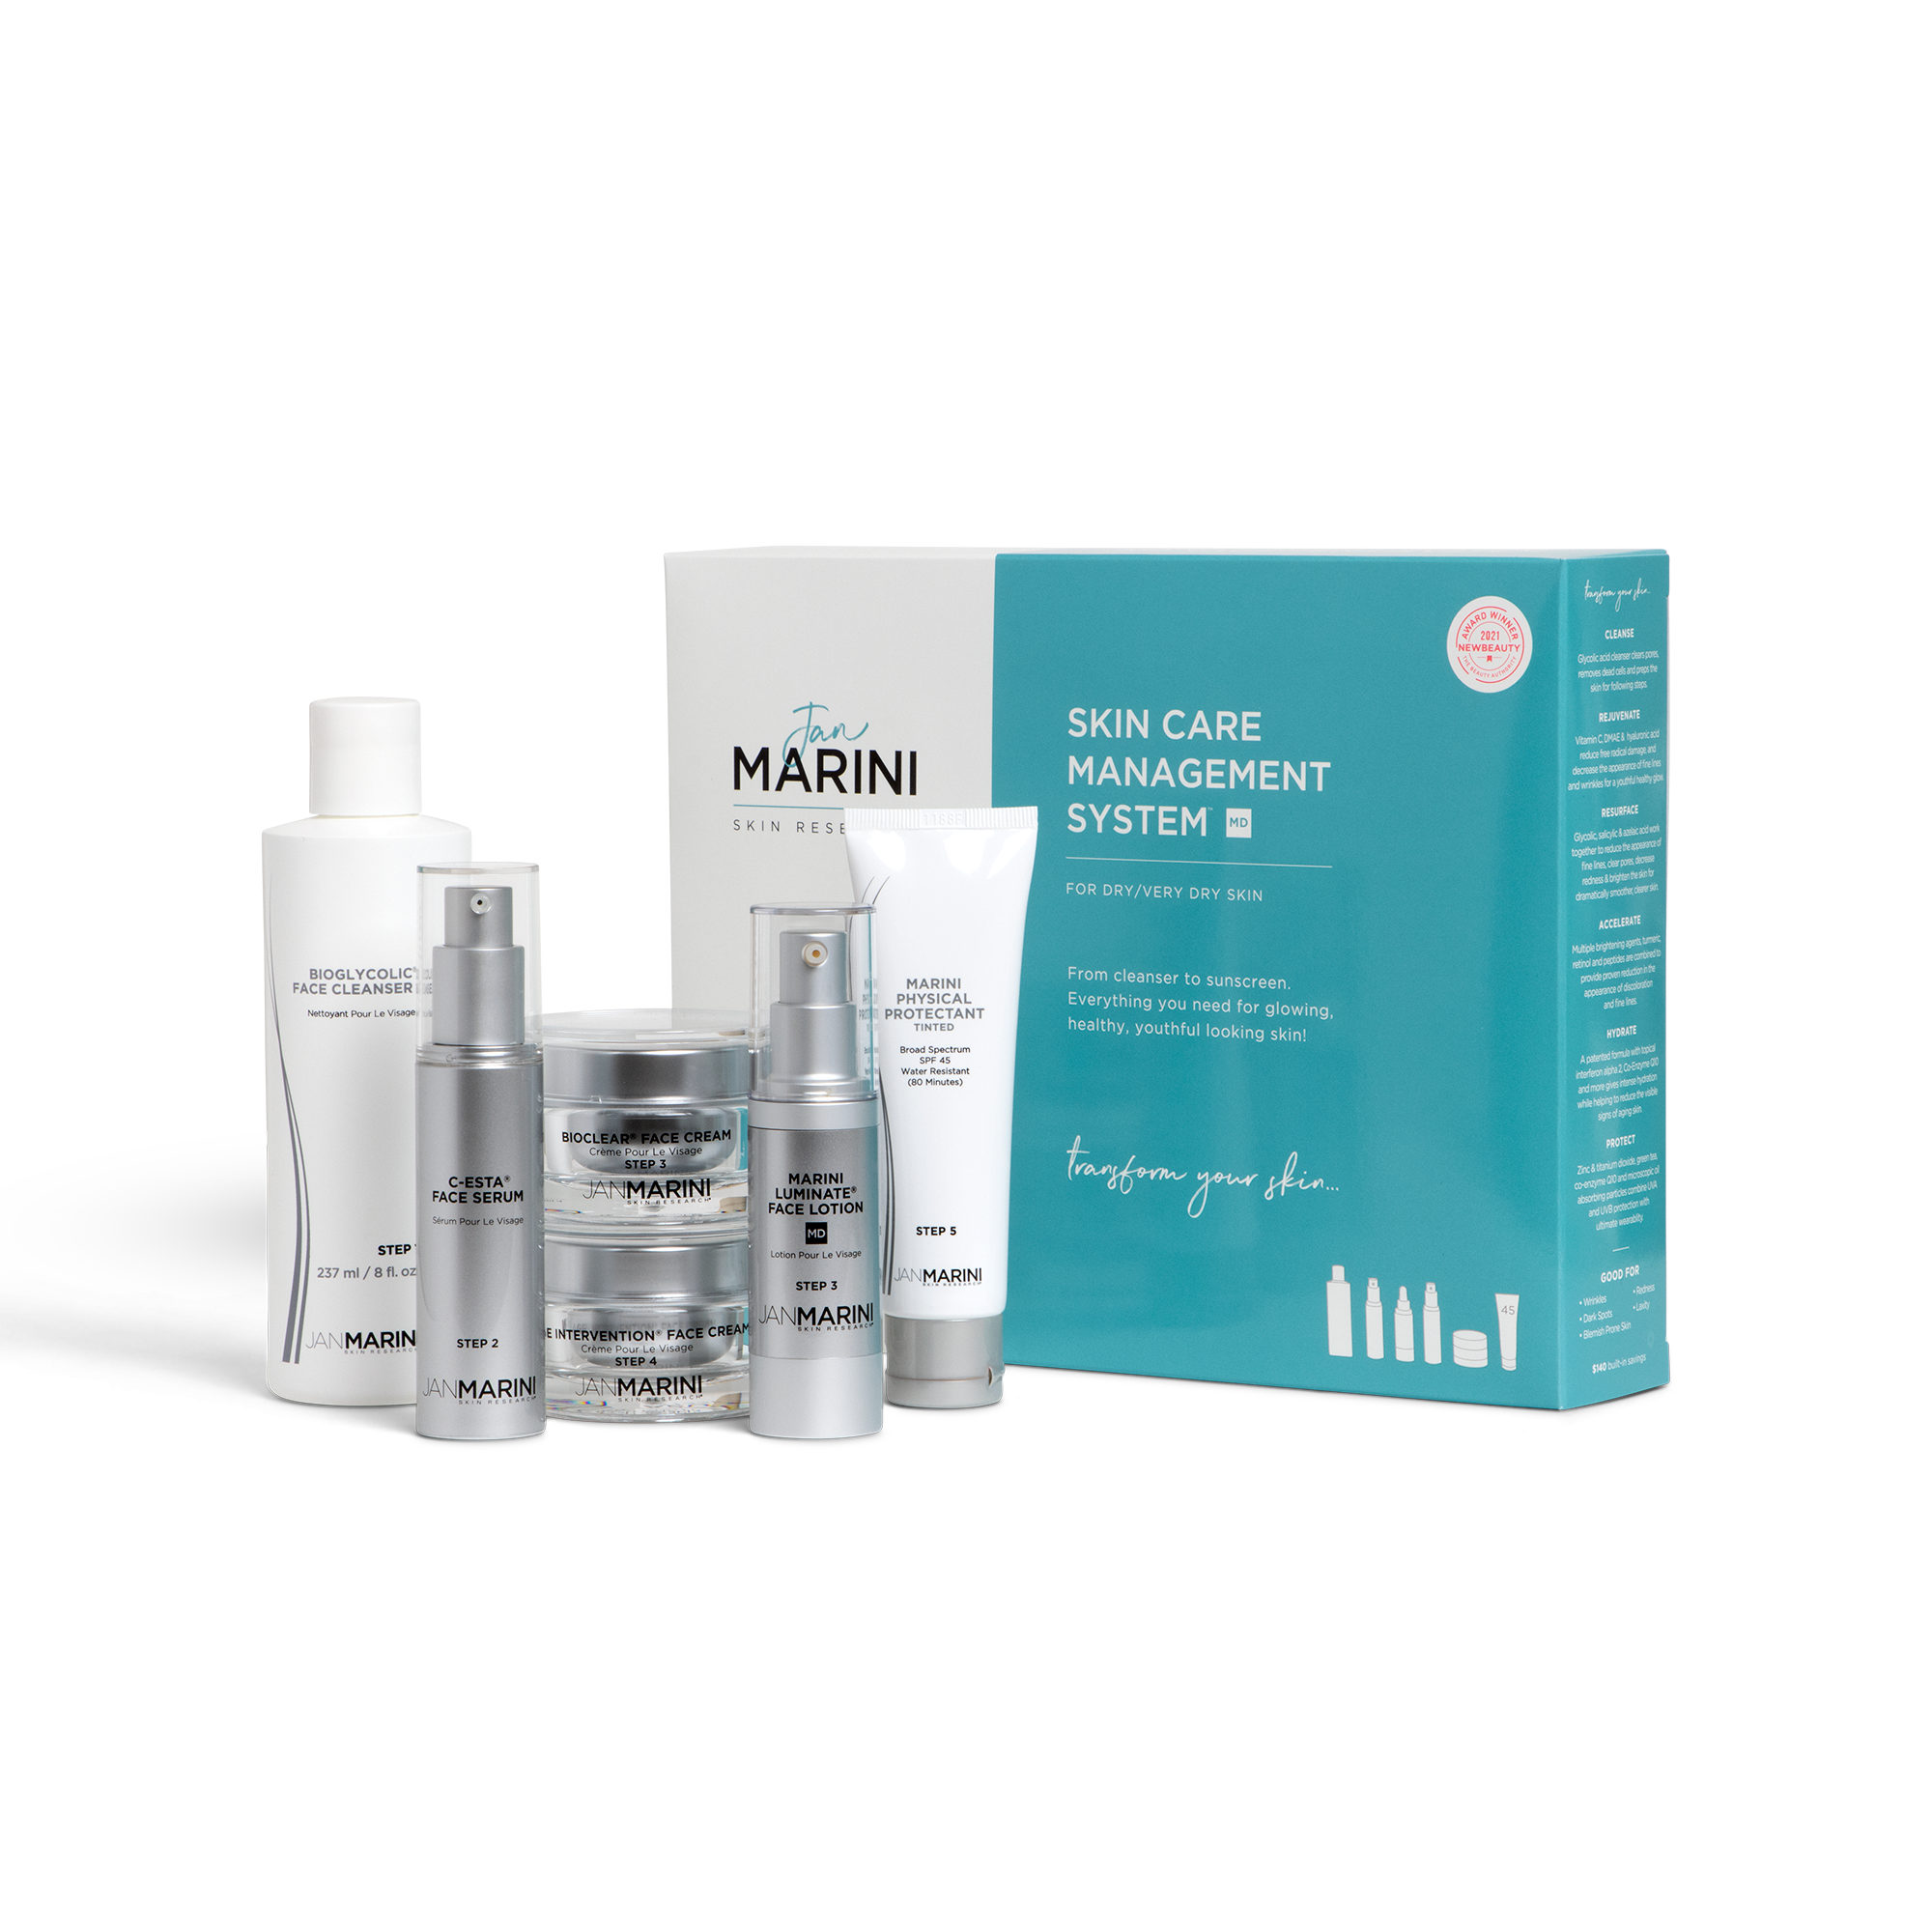 Jan Marini A Skin Care Management System - MD Dry/Very Dry with Marini Physical Protectant SPF 45 Tinted